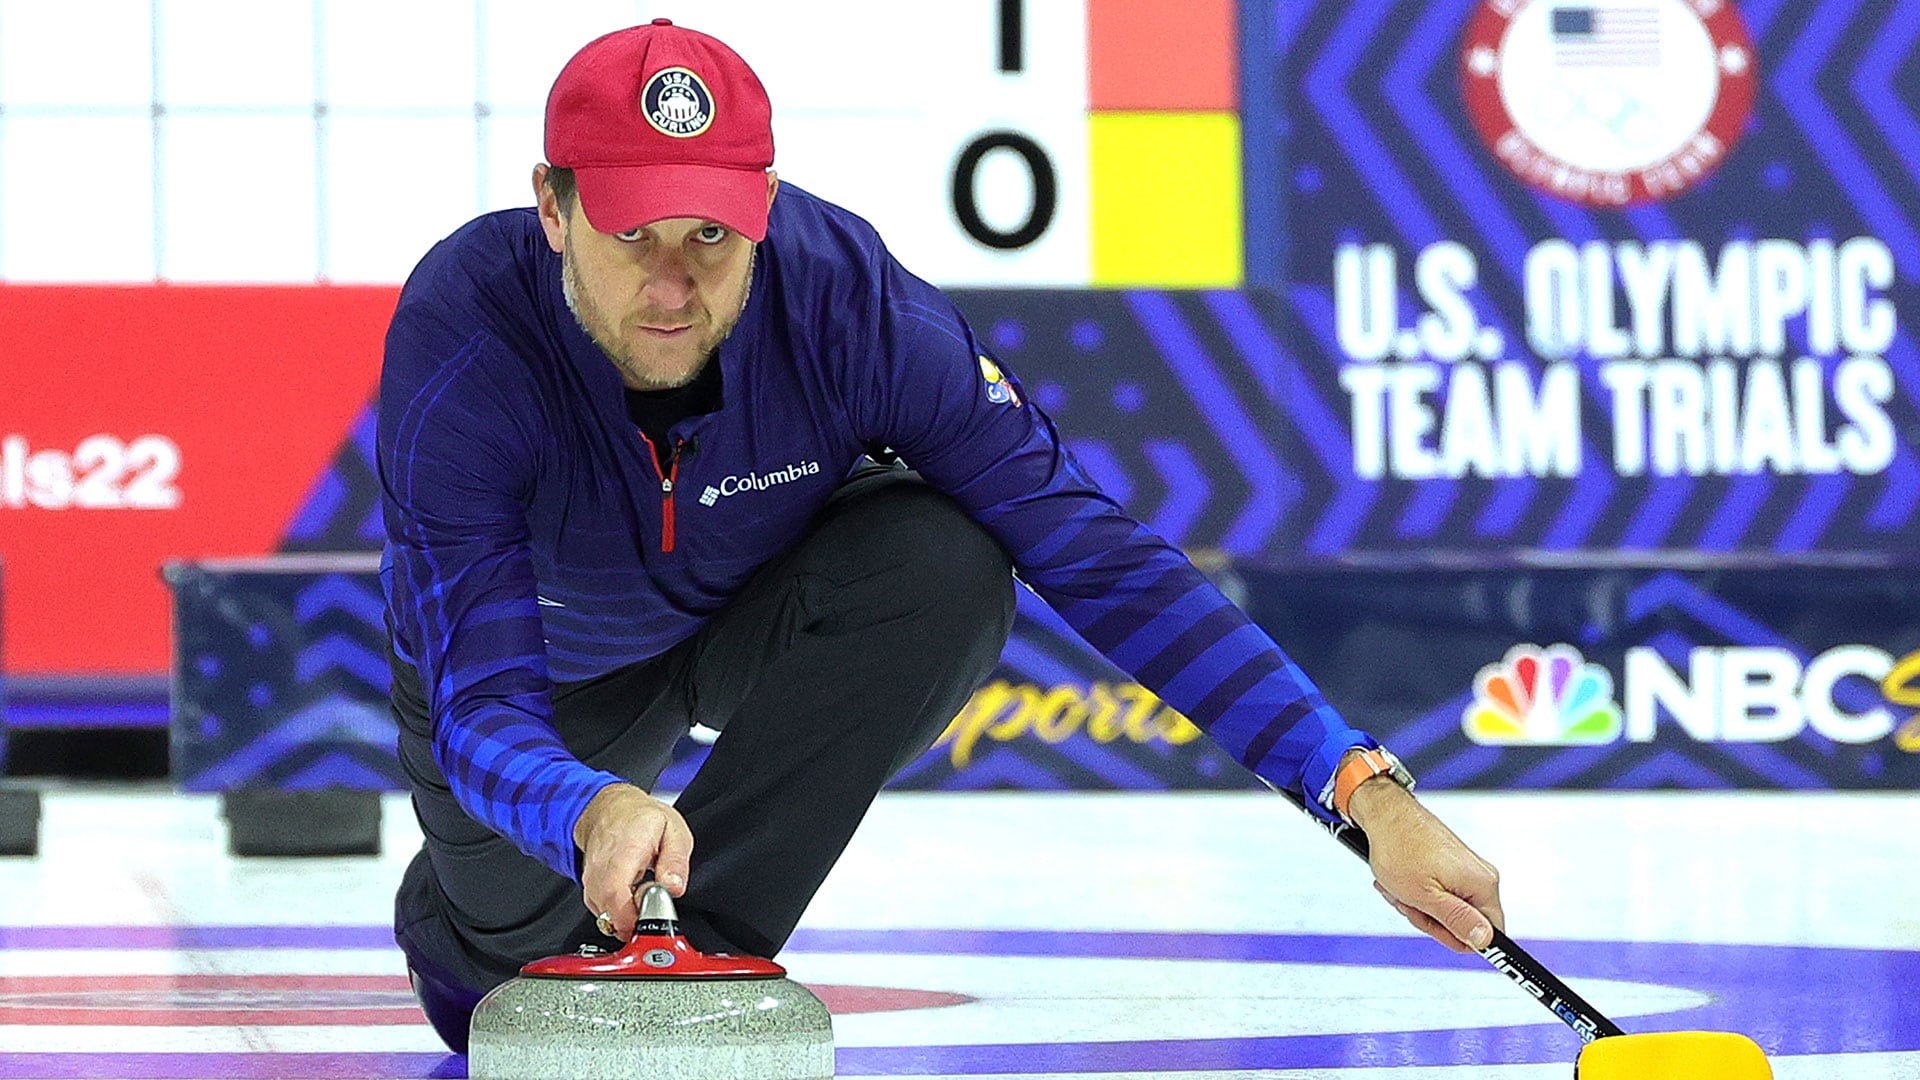 2022 Winter Games Kick Off with Curling Mixed Doubles